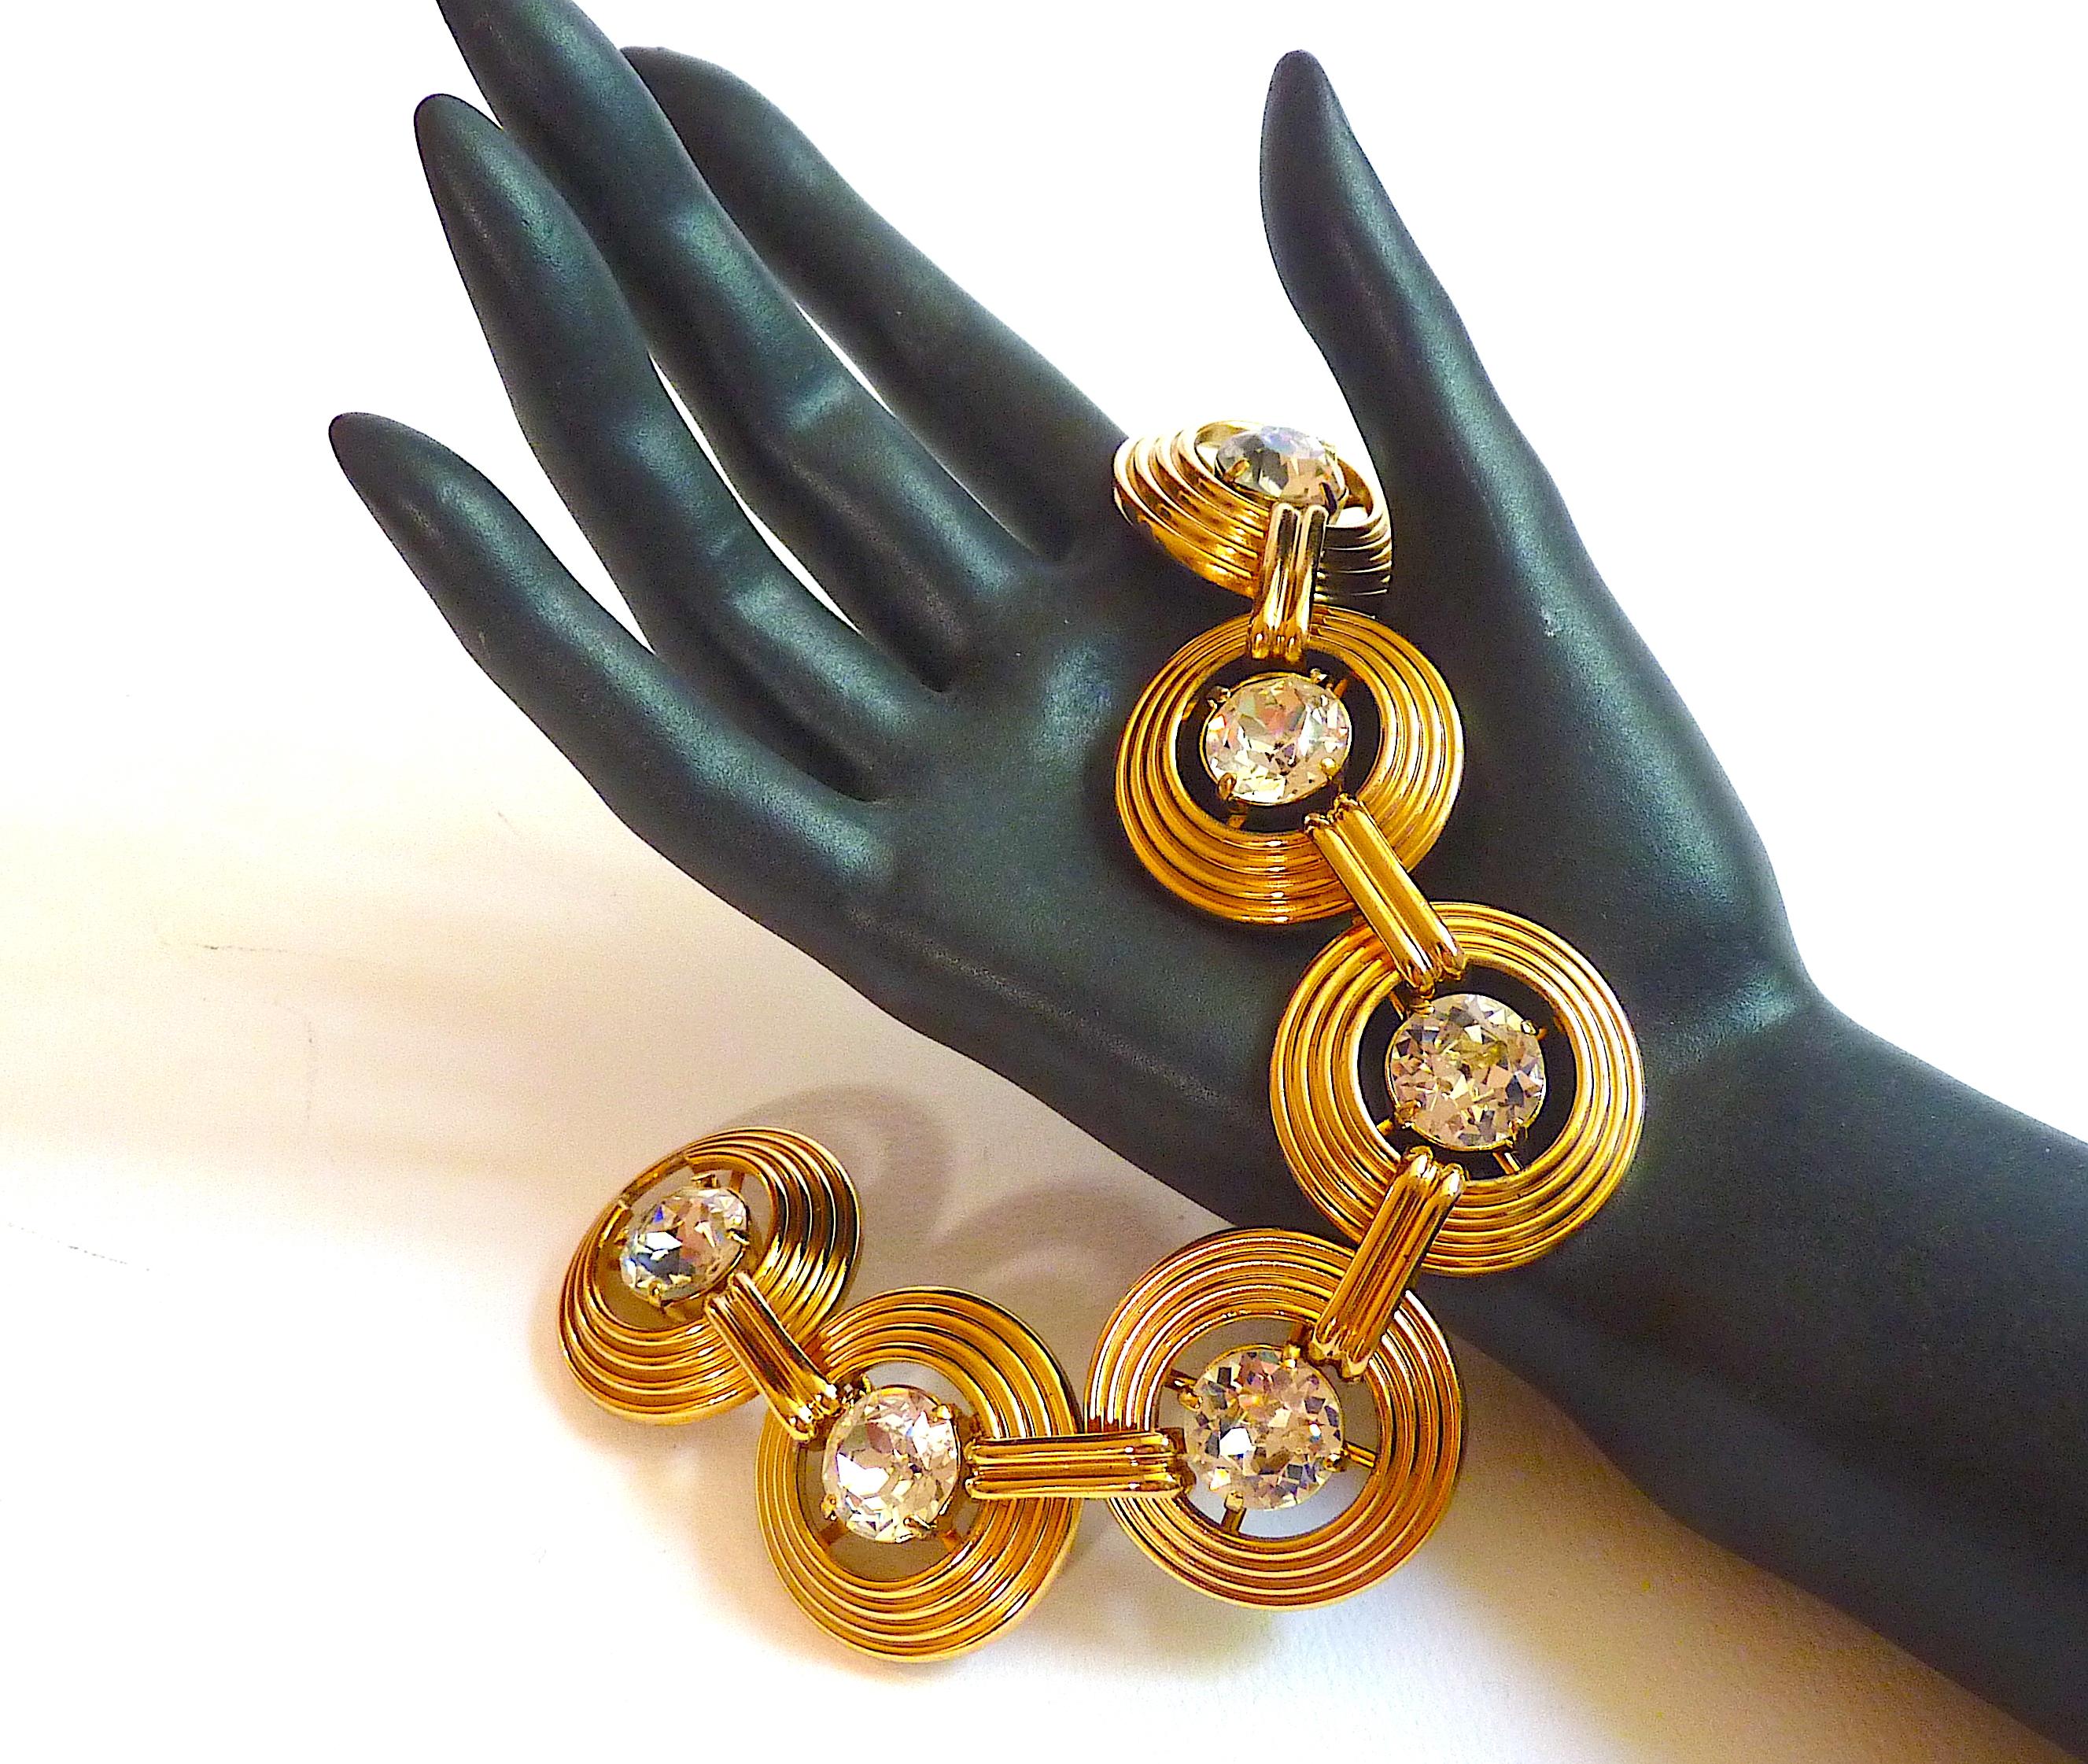 CHRISTIAN DIOR Bracelet, Art Deco Style, composed of Gold Metal Links adorned with Large Clear Crystal Cabochons, Vintage form the 70s

Signed Chr. Dior Germany inside the clasp. Until 1980s, Dior Jewelries were manufactured in Germany by the famous